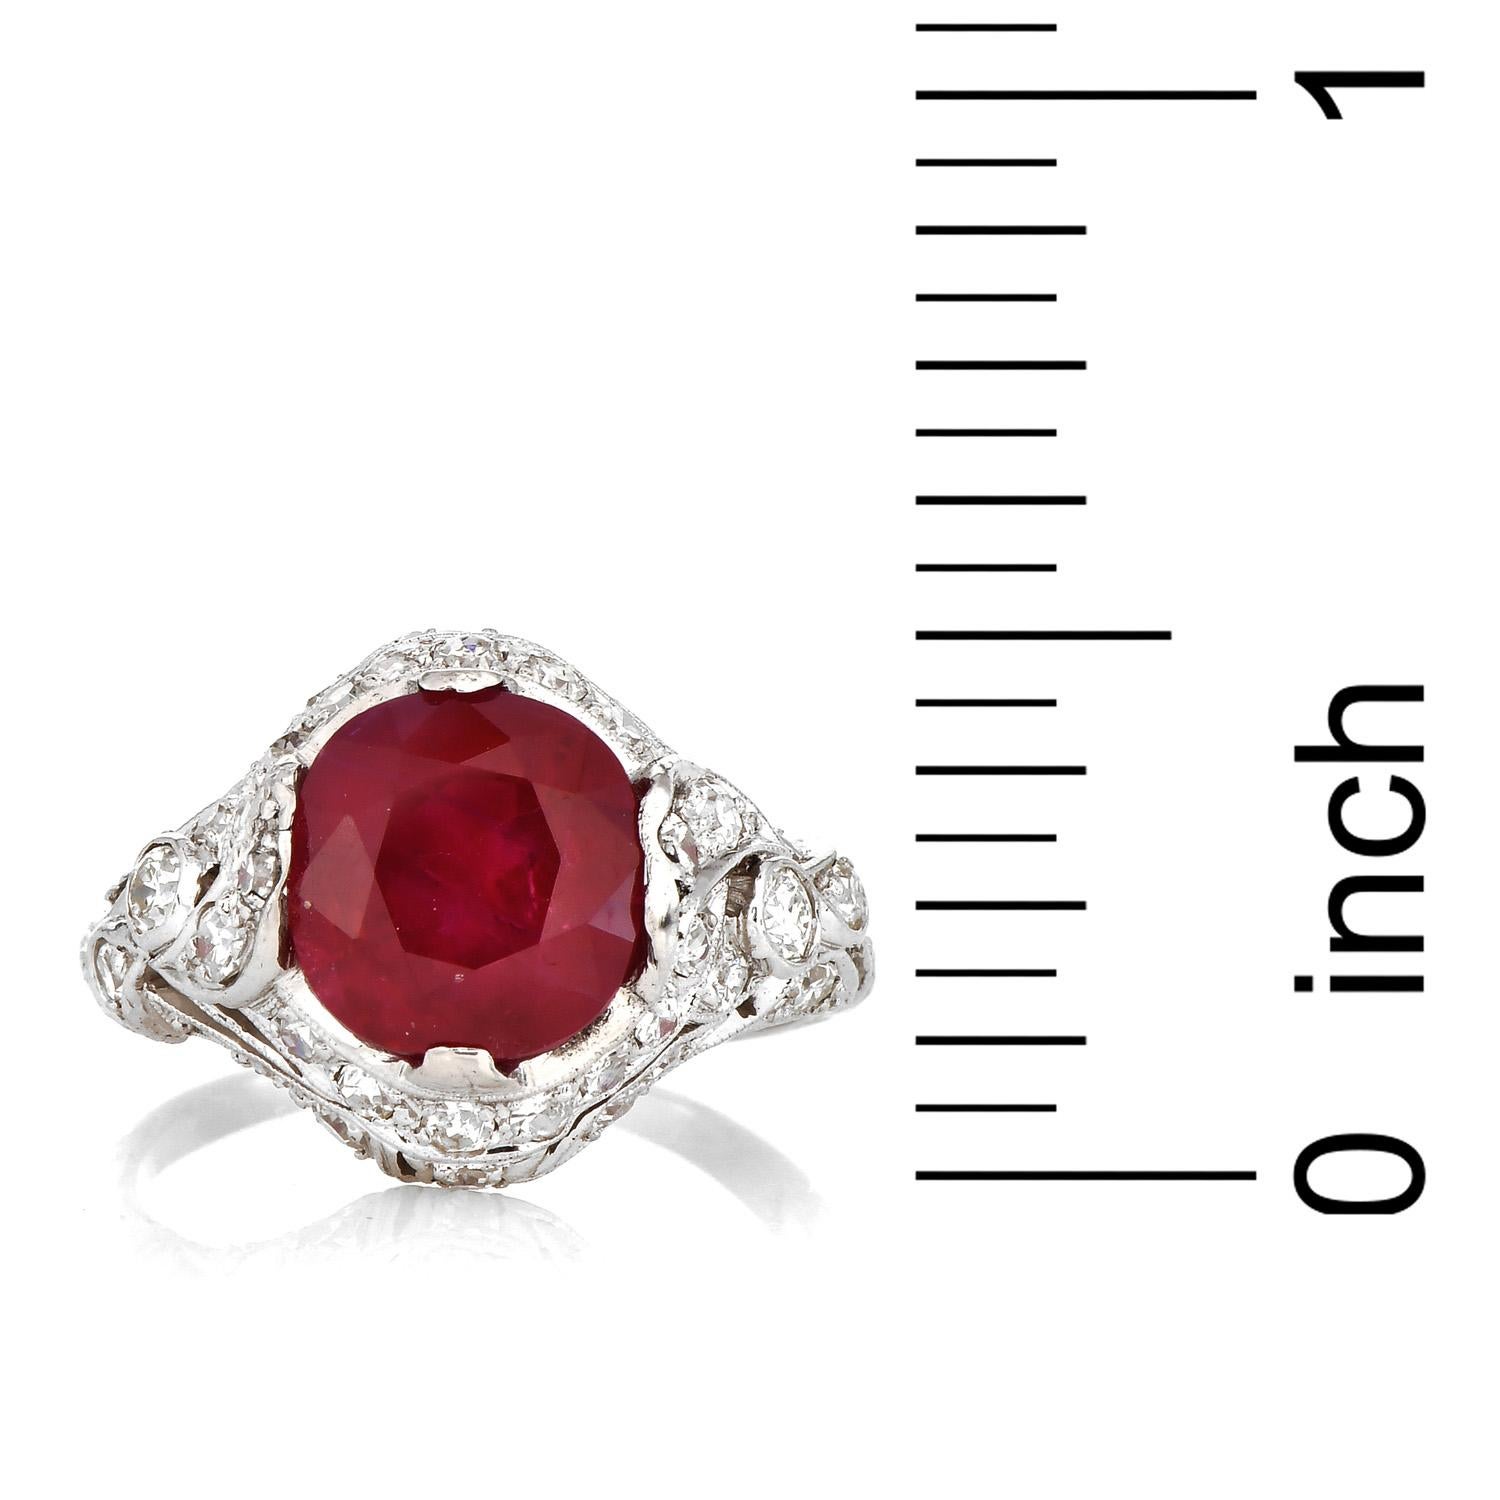 GIA 4.06 Ct Burma Ruby Diamond Platinum Antique Cocktail Ring For Sale 2